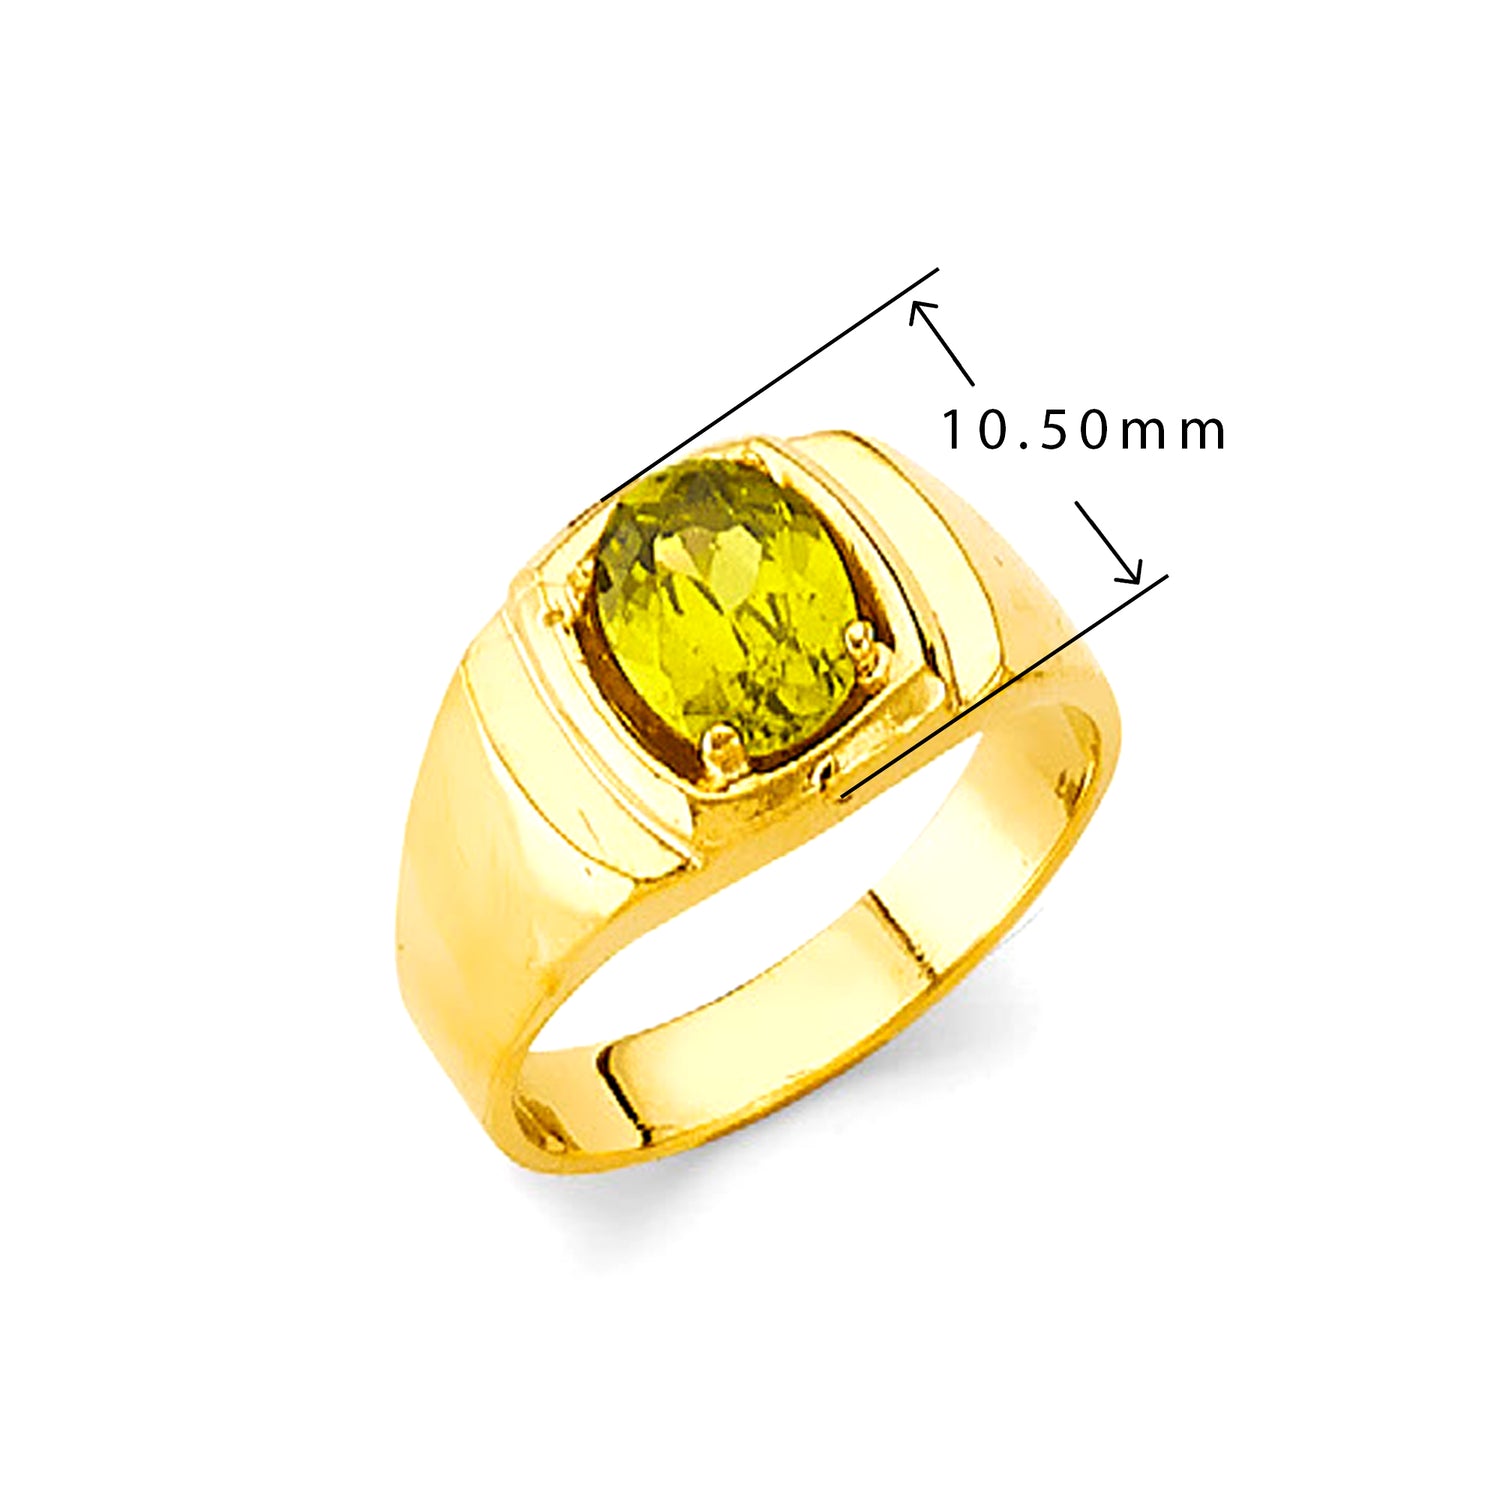 Pristine Peridot Ring in Solid Gold with Measurement